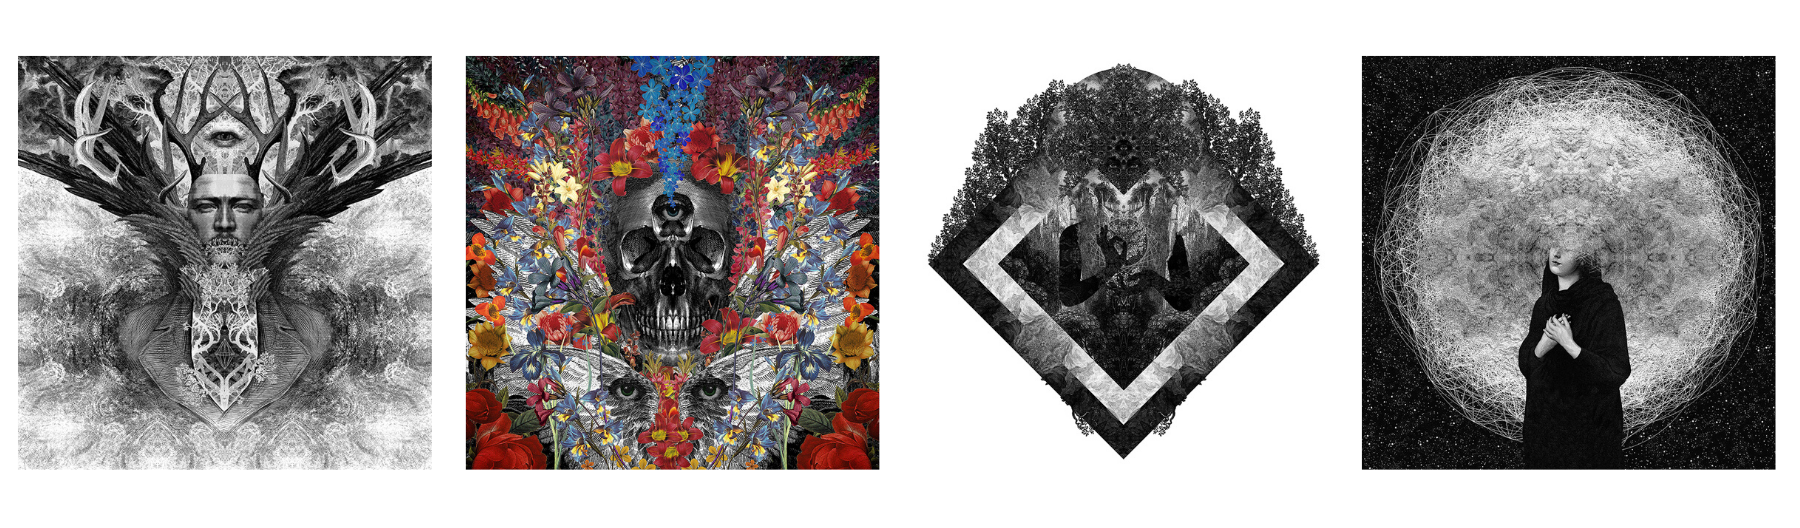 The Interview: Dan Hillier on his new Remix collection | Image